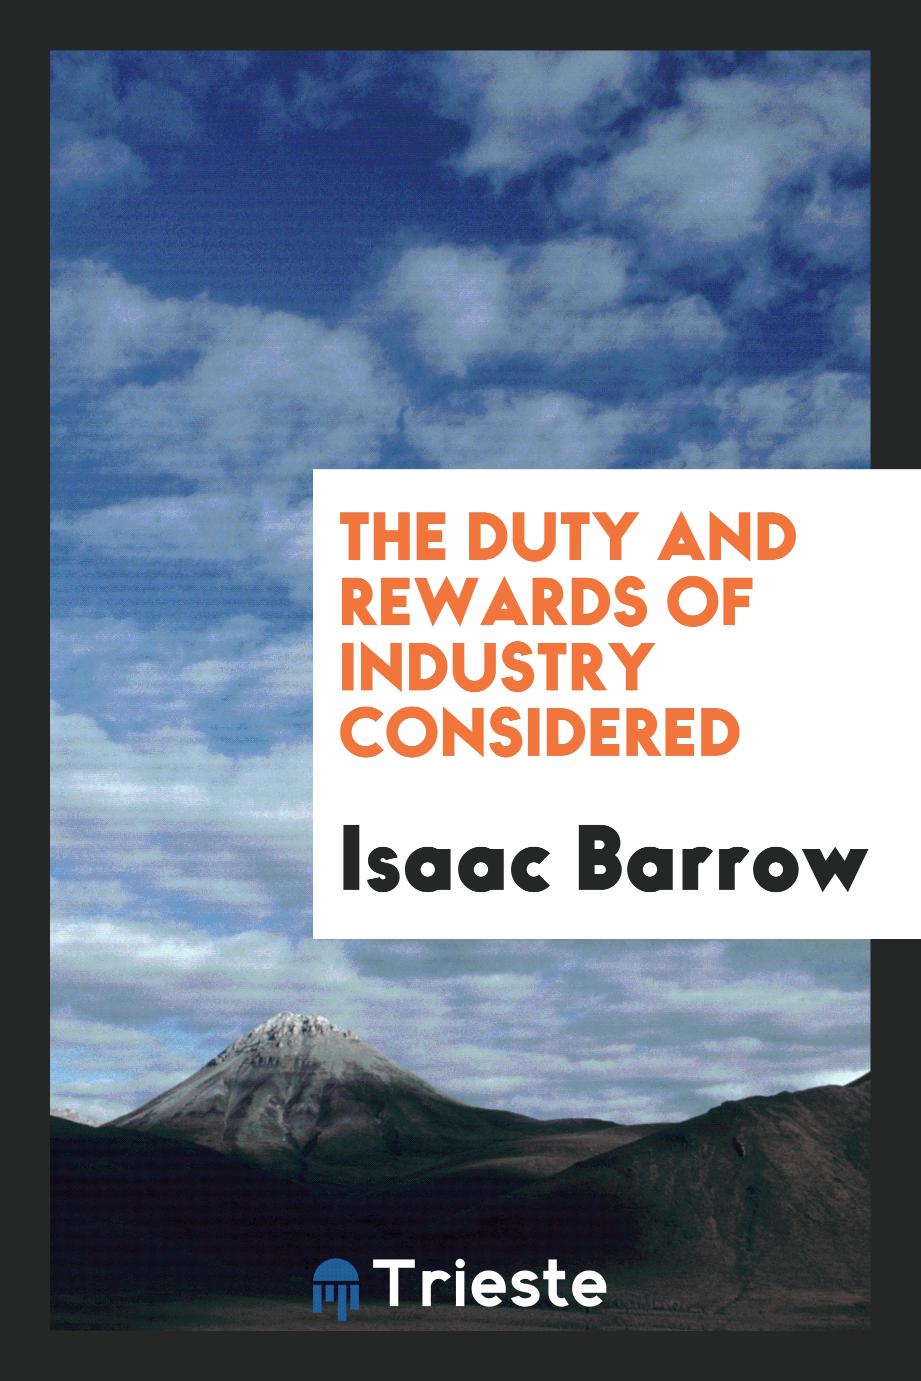 Isaac Barrow - The Duty and Rewards of Industry Considered